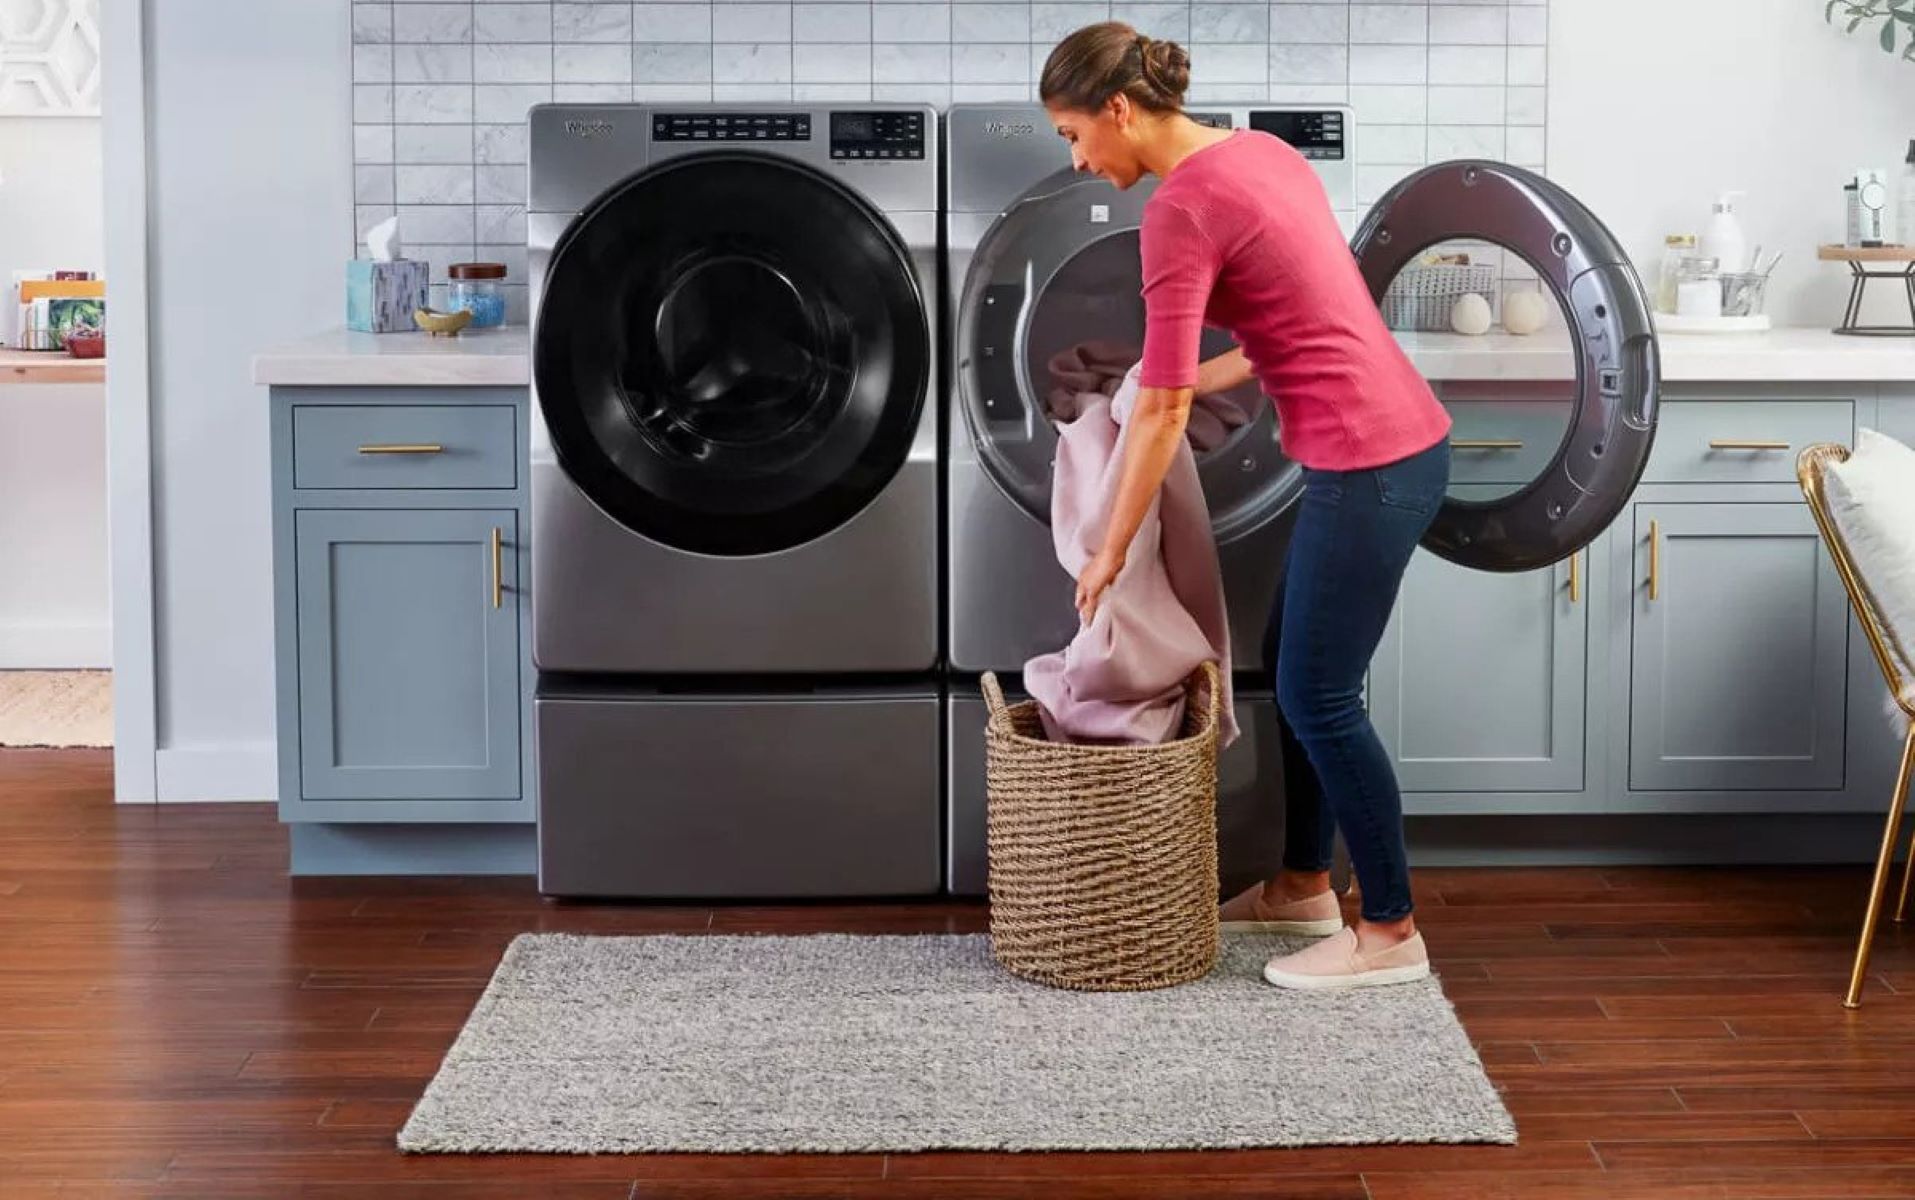 How To Fix The Error Code F43 For Whirlpool Dryer